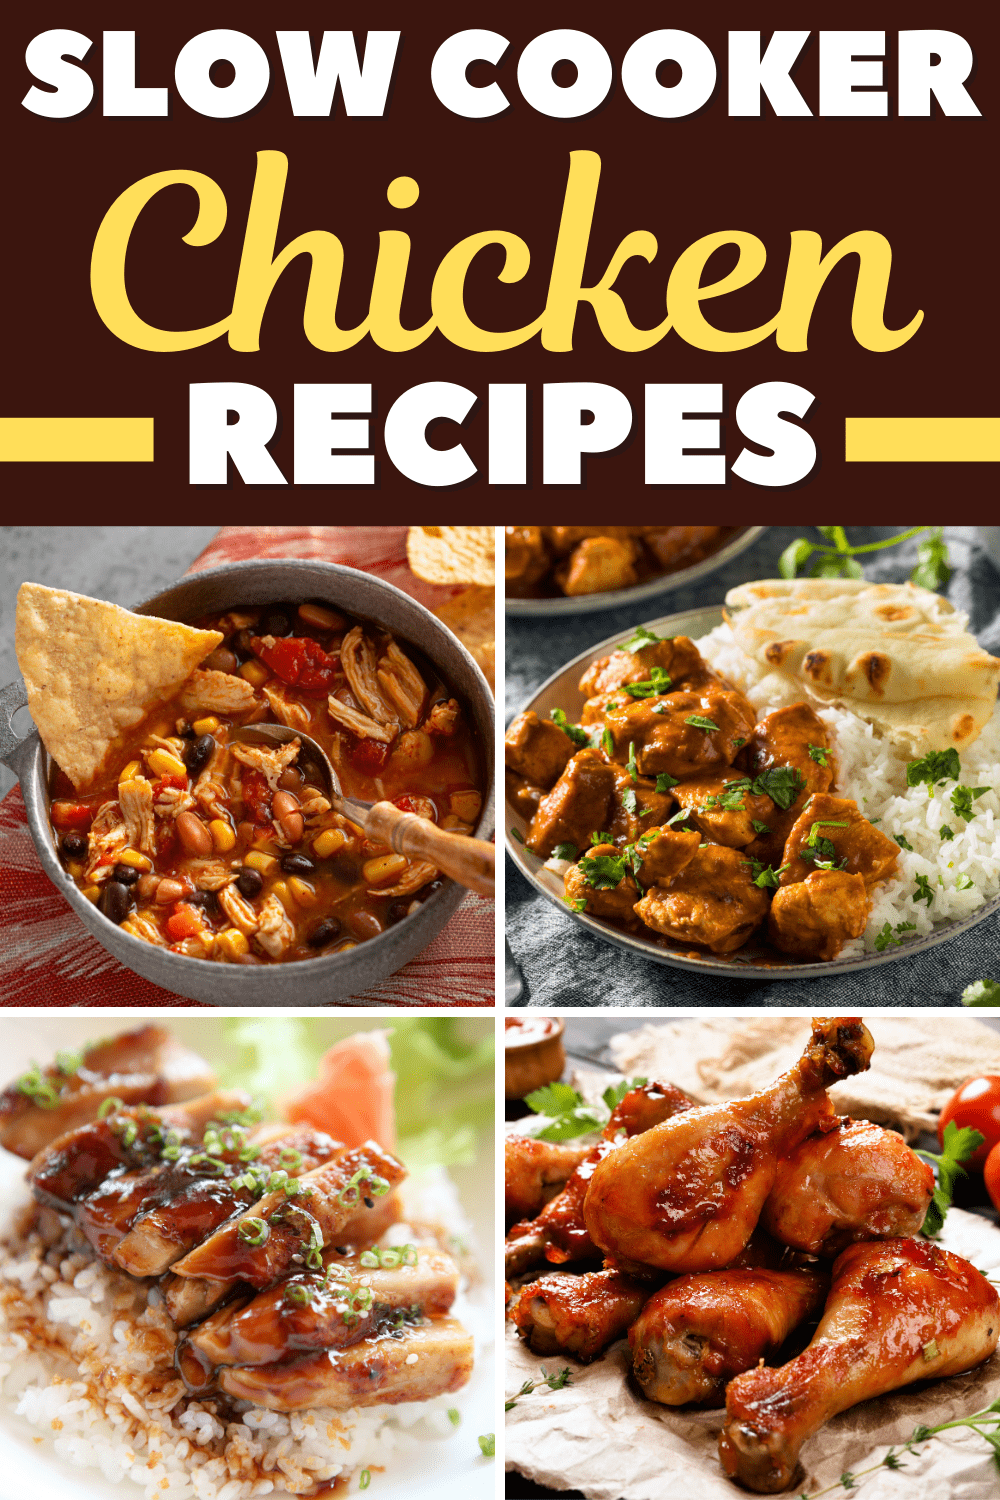 30 Best Slow Cooker Chicken Recipes - Insanely Good